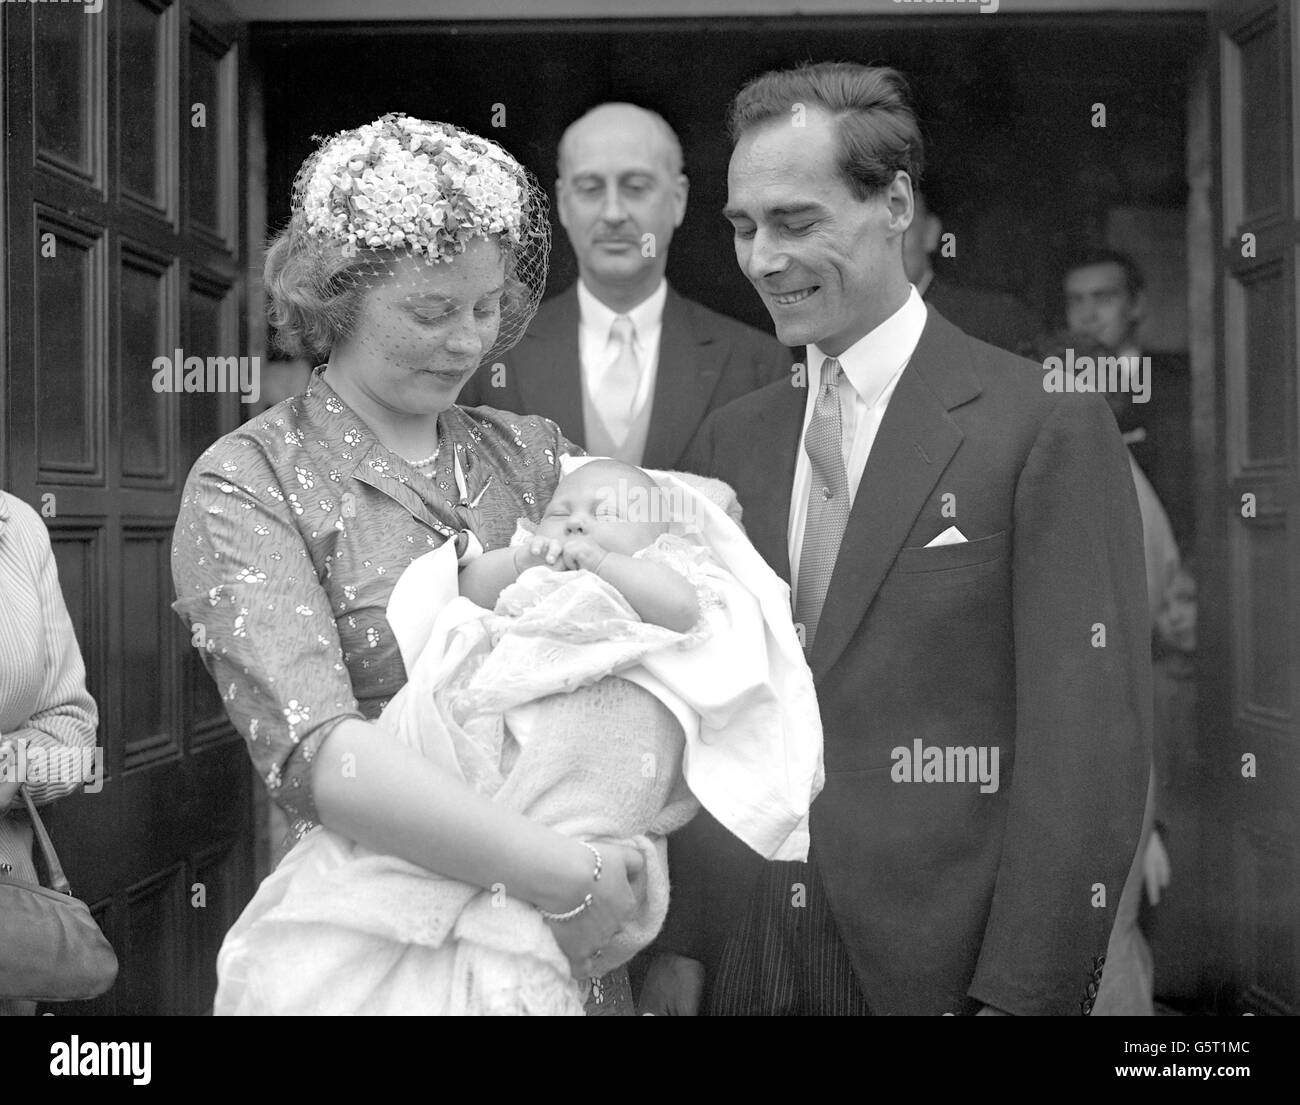 Prince and Princess Tomislav of Yugoslavia with their son, Nikola, after the baby had been christened at the Serbian Church in Ladbroke Grove, London. In the centre is the Margrave of Baden, the baby's grandfather, who was godfather to Nikola. Before her marriage, Princess Tomislav was Princess Margarita of Baden and is the niece of the Duke of Edinburgh. Prince Tomislav is the brother of ex-King Peter of Yugoslavia. Stock Photo